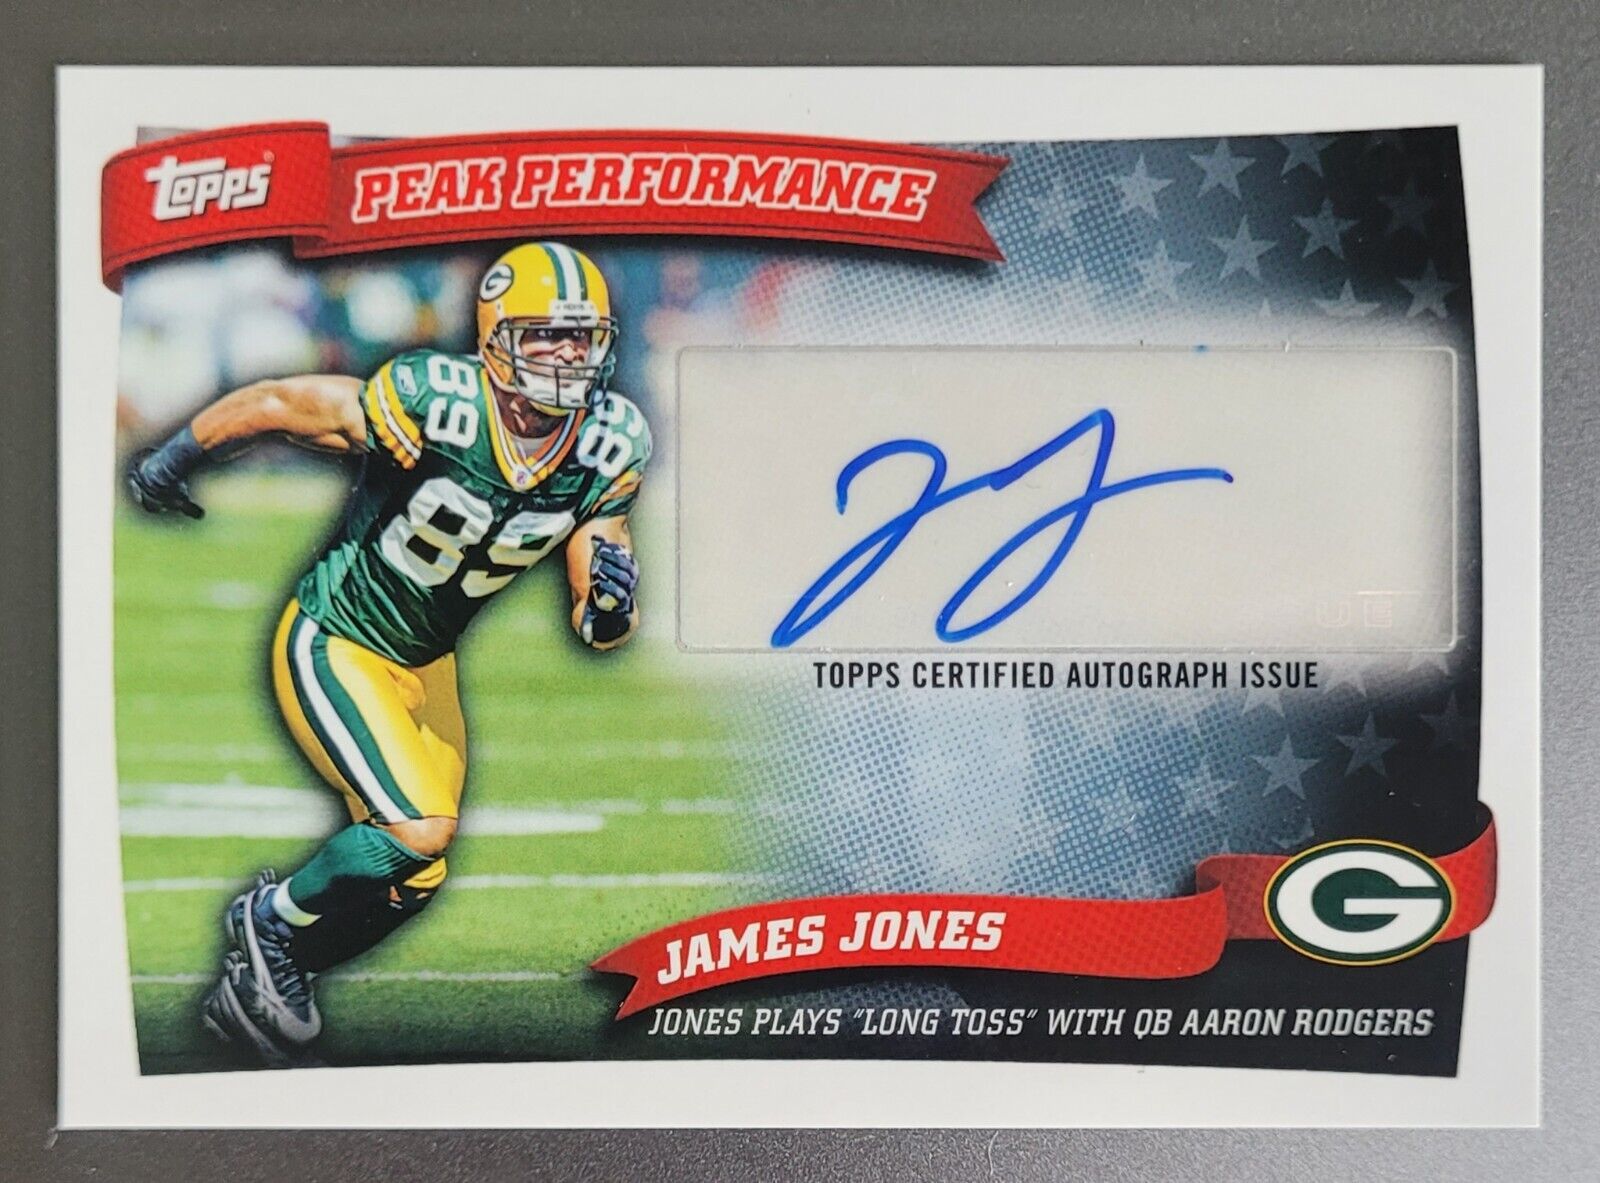 2010 PACKERS James Jones signed card AUTO Topps Performance PPA-JJ Autographed